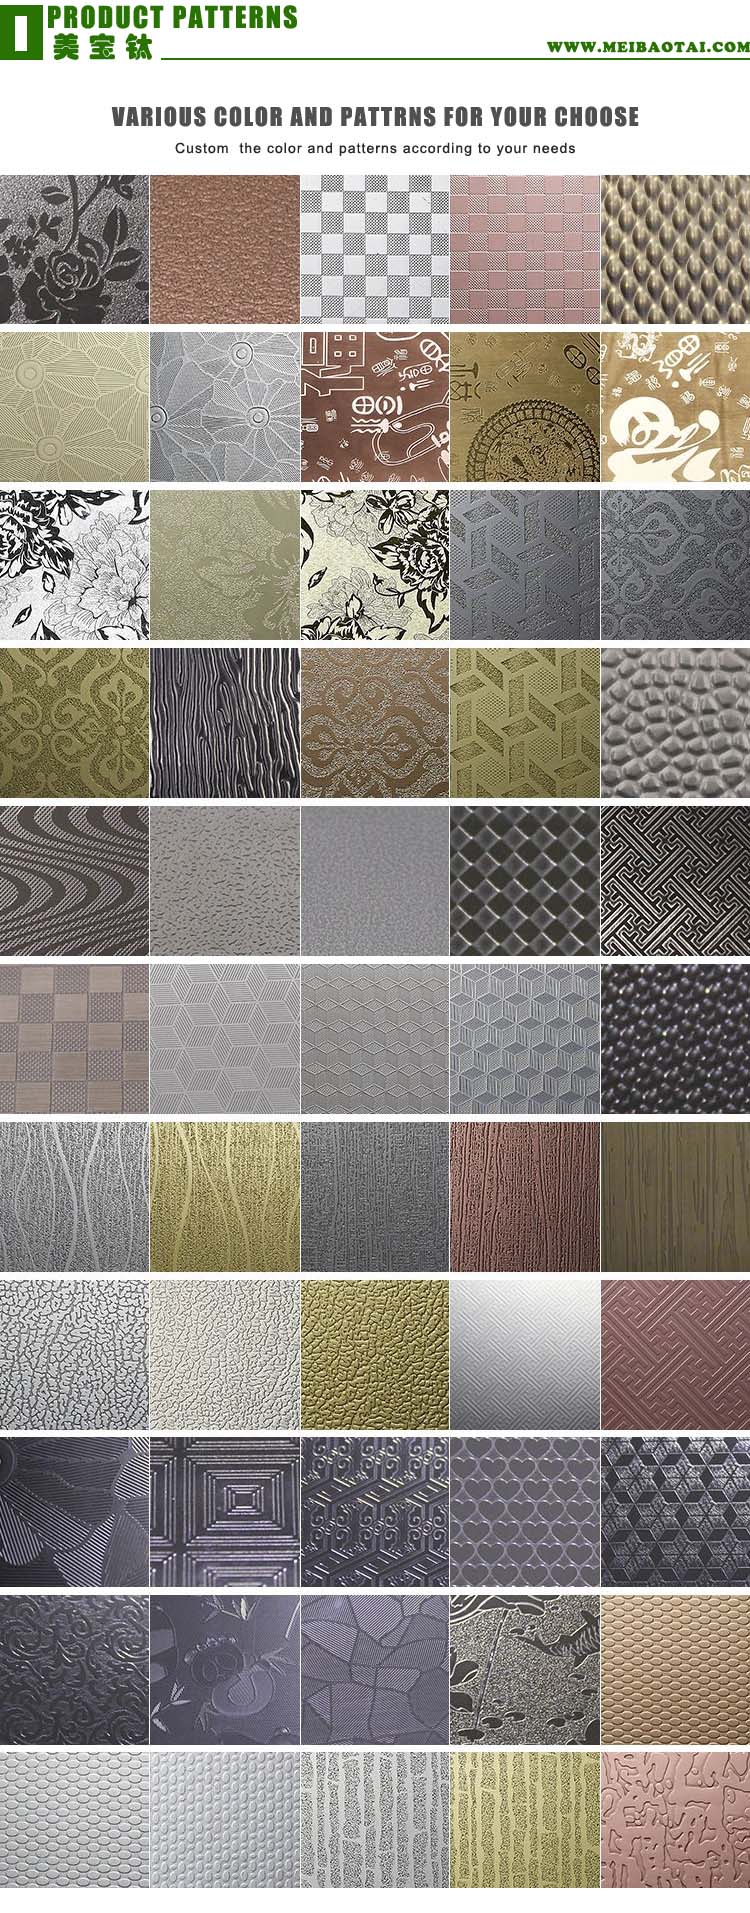 embossed_products_patterns